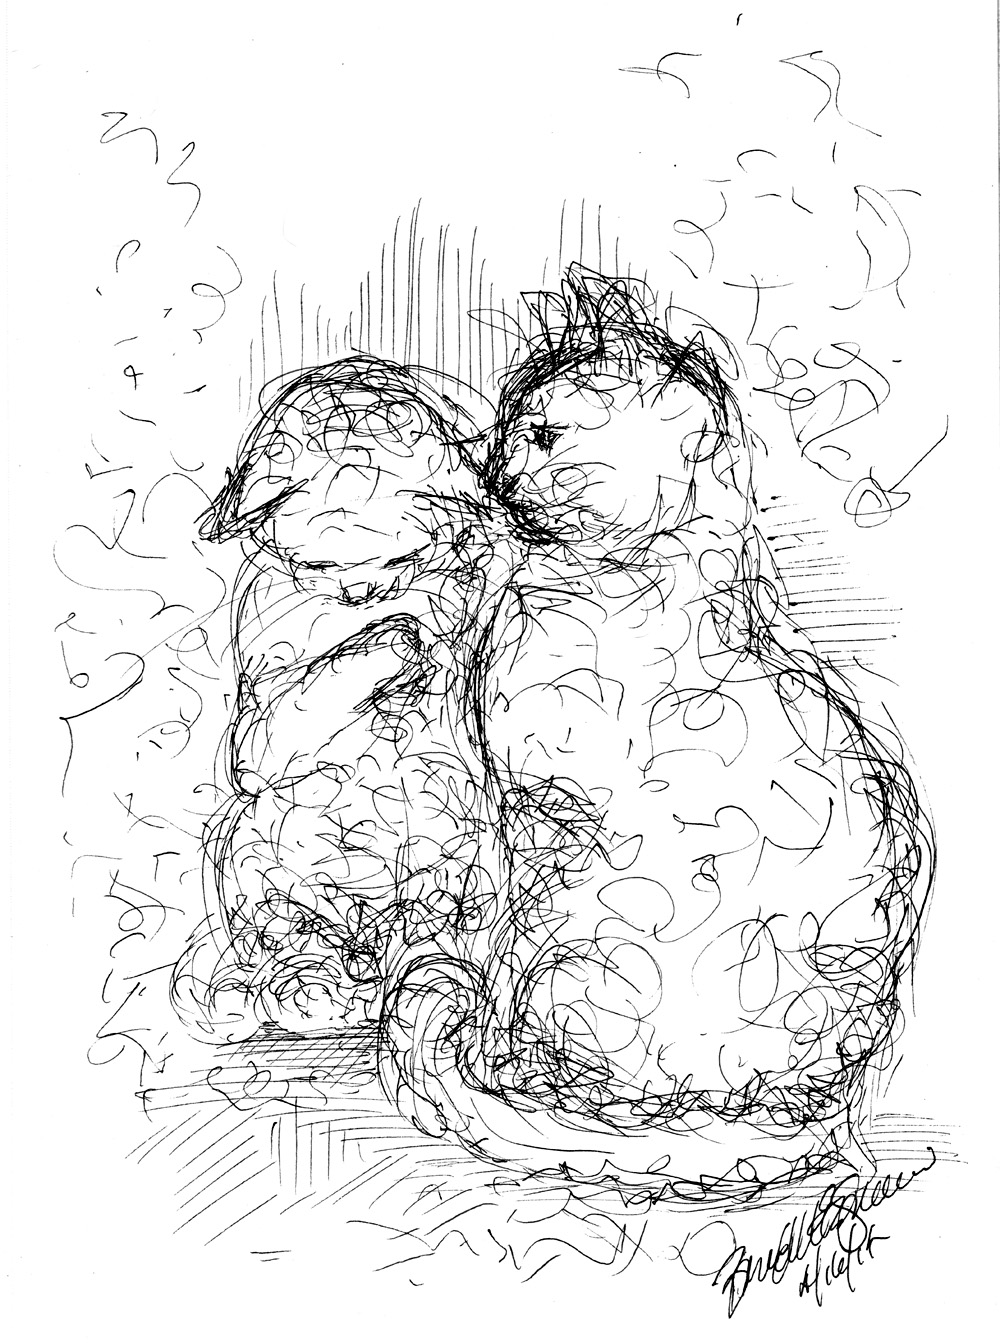 ink sketch of two cats